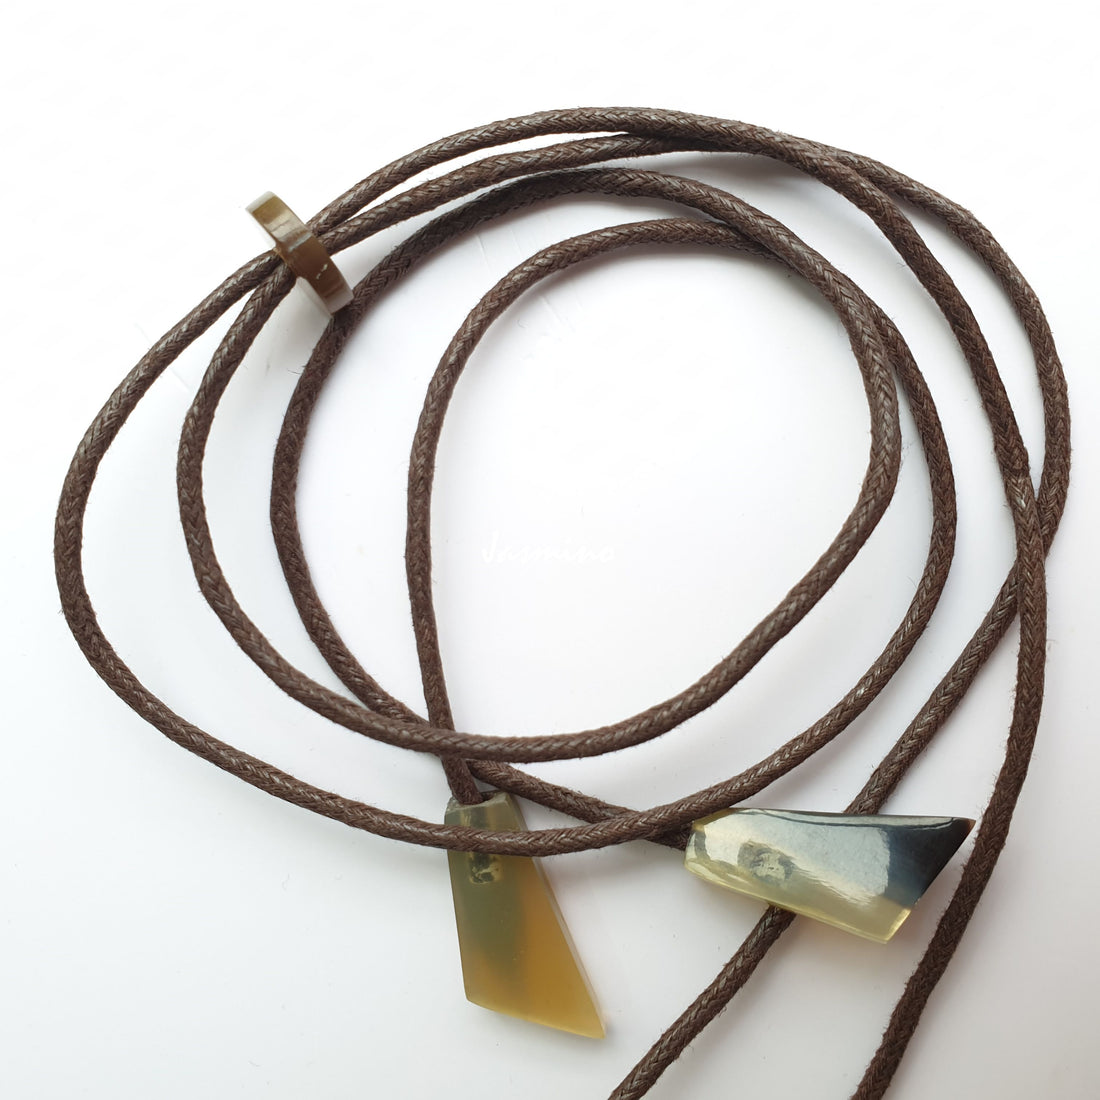 Suede-black cords with small natural buffalo horn pieces on the light background, impressive gift for her